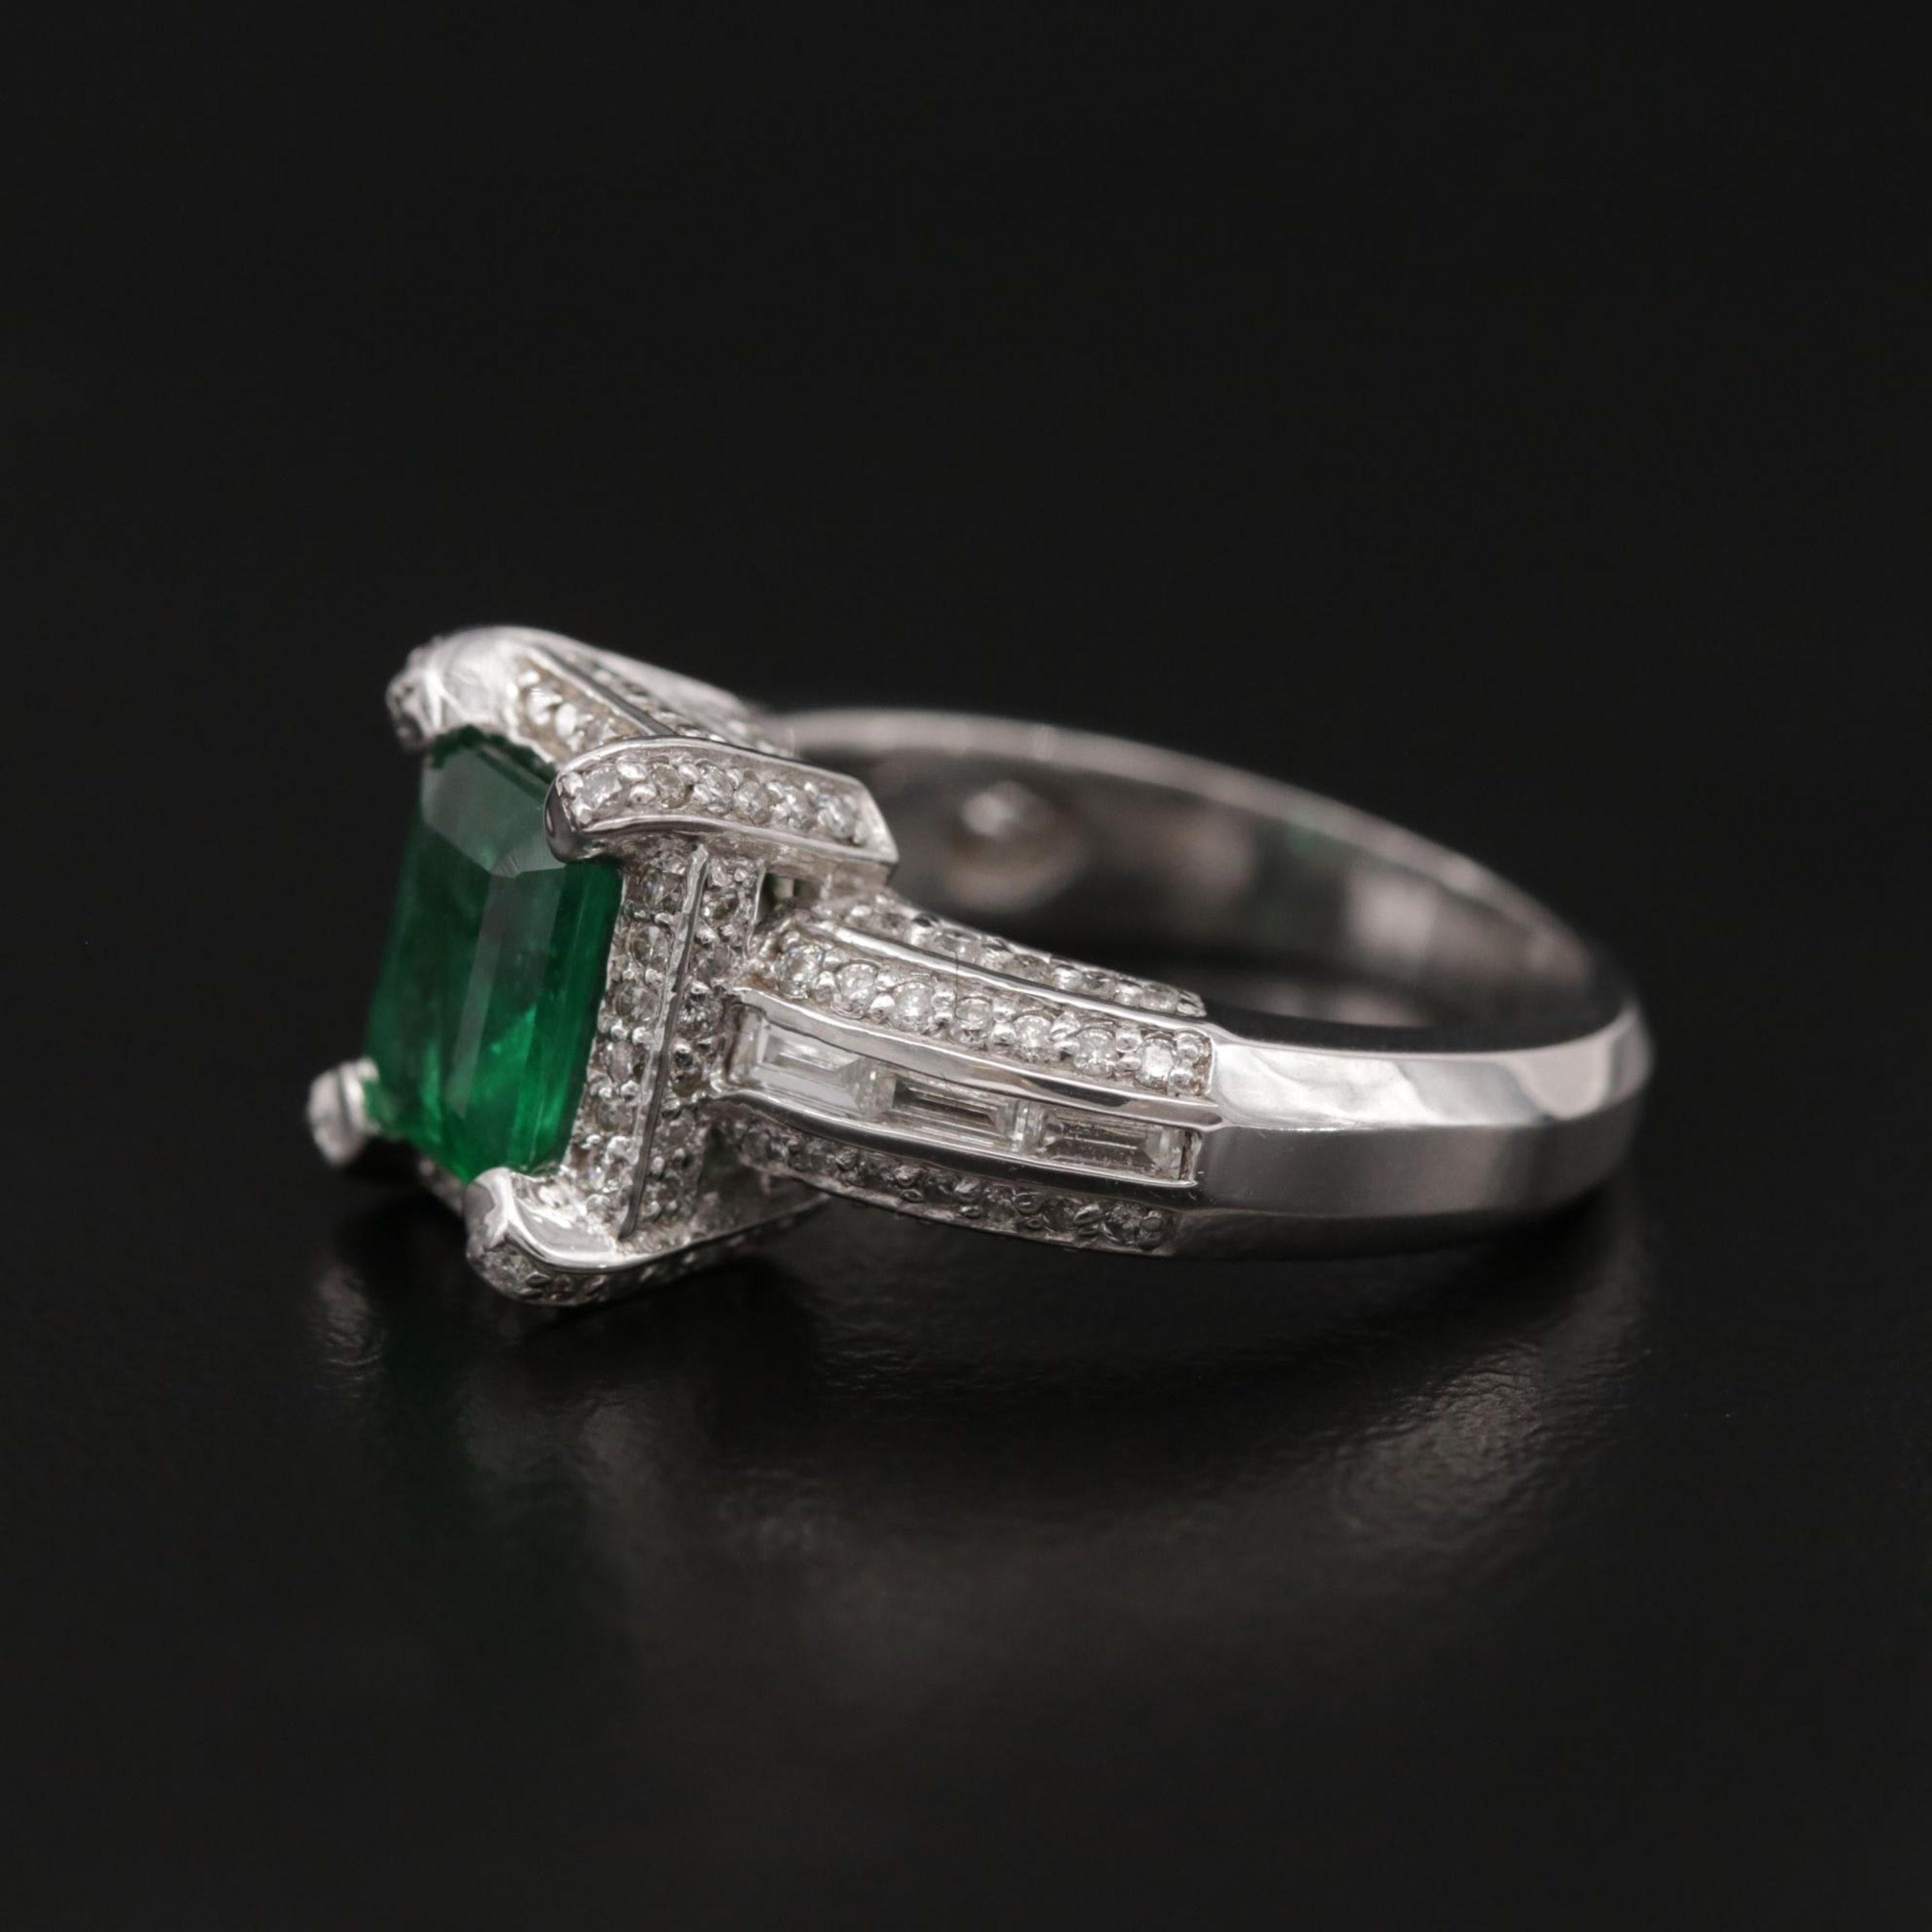 For Sale:  3 Carat Natural Emerald Engagement Ring, White Gold Halo Diamond Wedding Ring 6